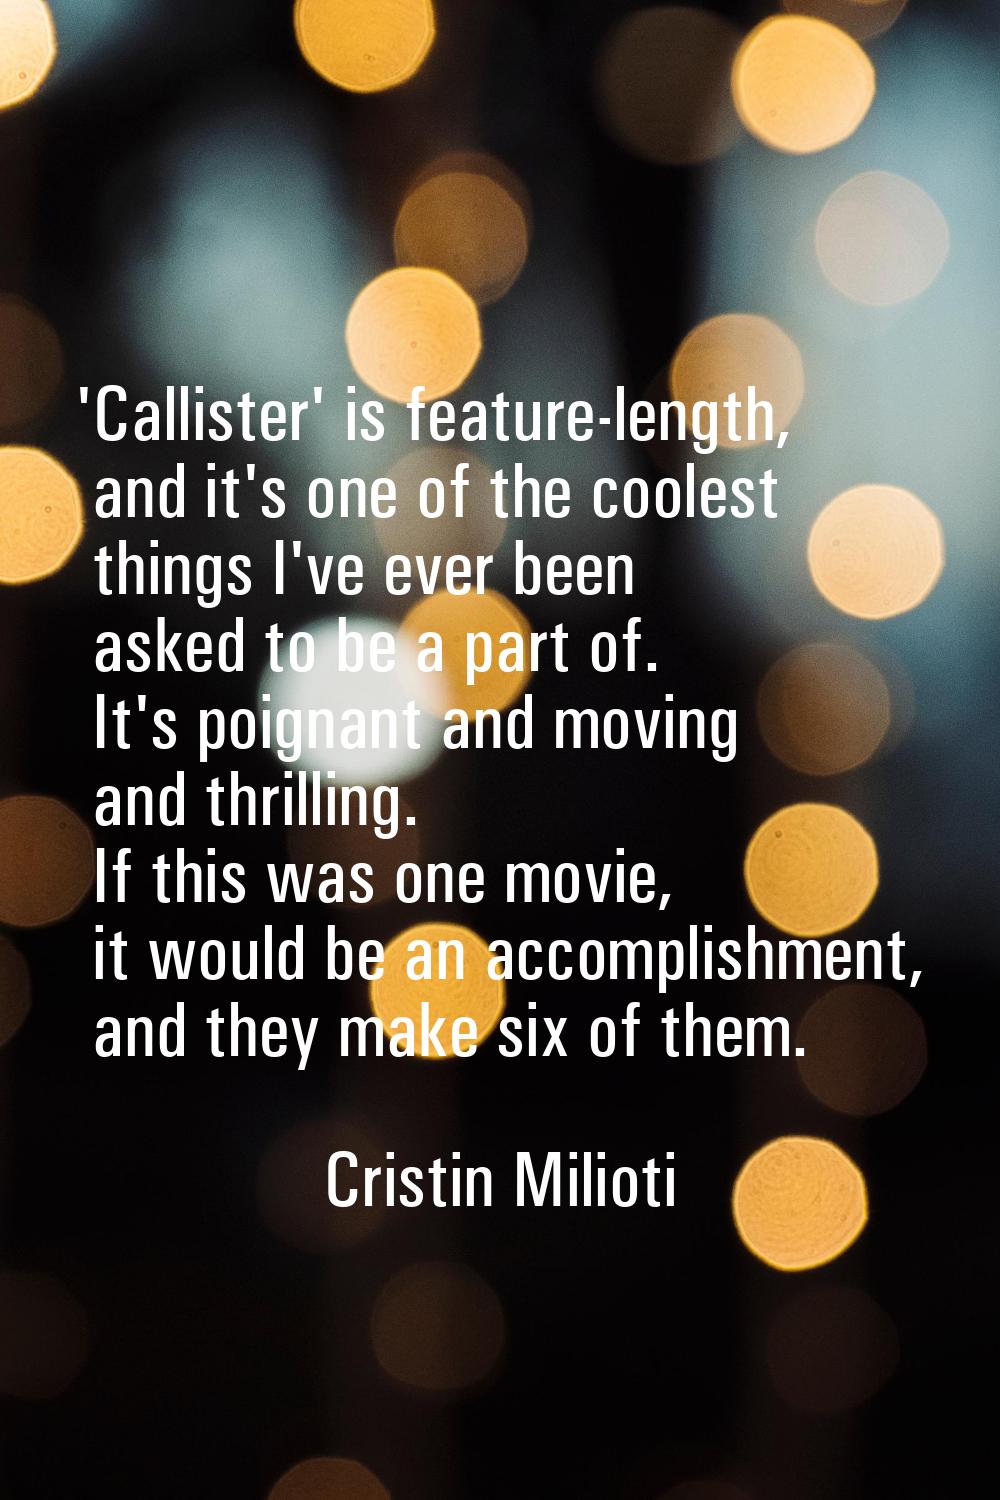 'Callister' is feature-length, and it's one of the coolest things I've ever been asked to be a part